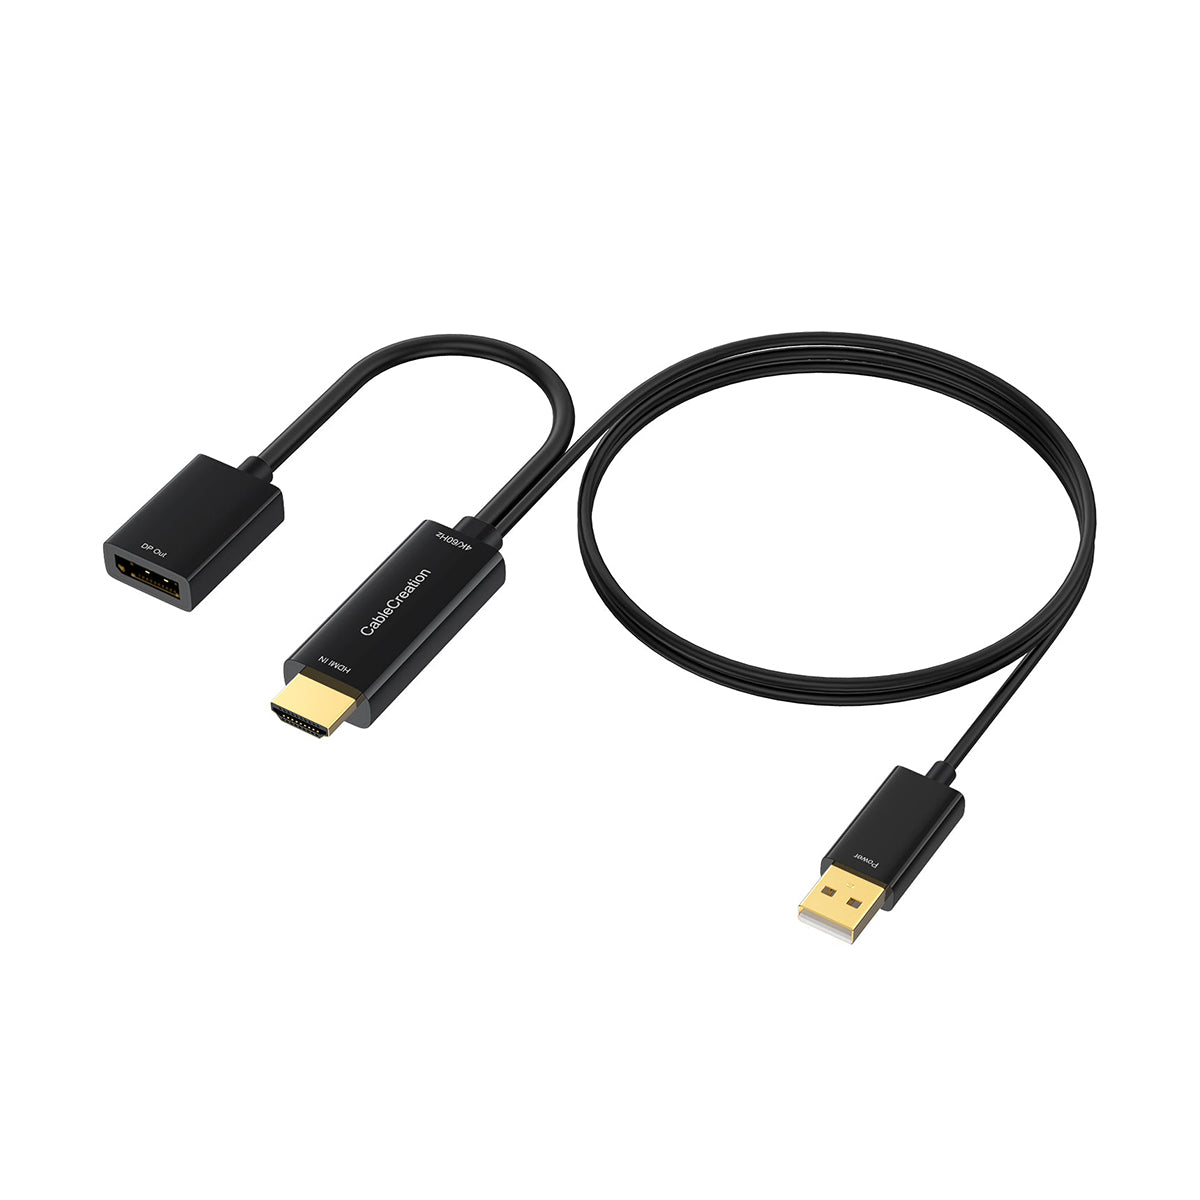 brugerdefinerede At accelerere upassende HDMI to DisplayPort Adapter with USB Power | CableCreation